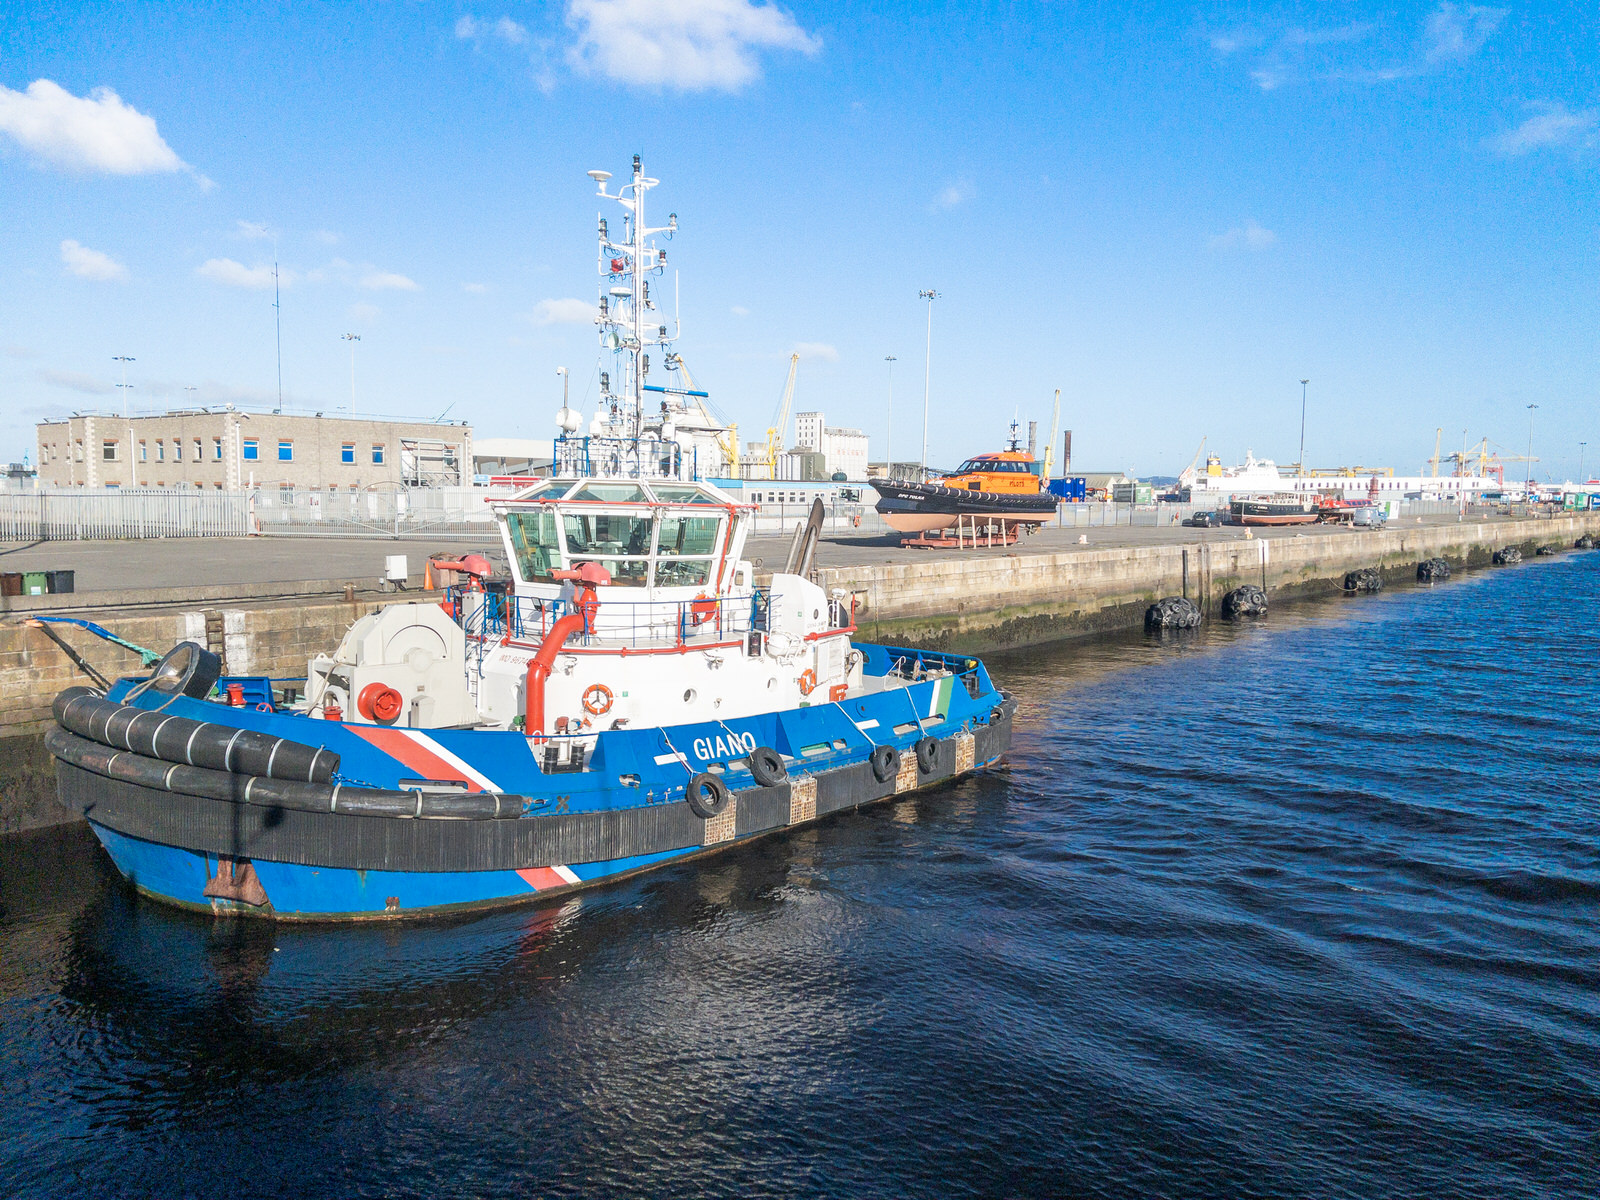 GIANO THE TUGBOAT SERVING THE PORT OF DUBLIN 002